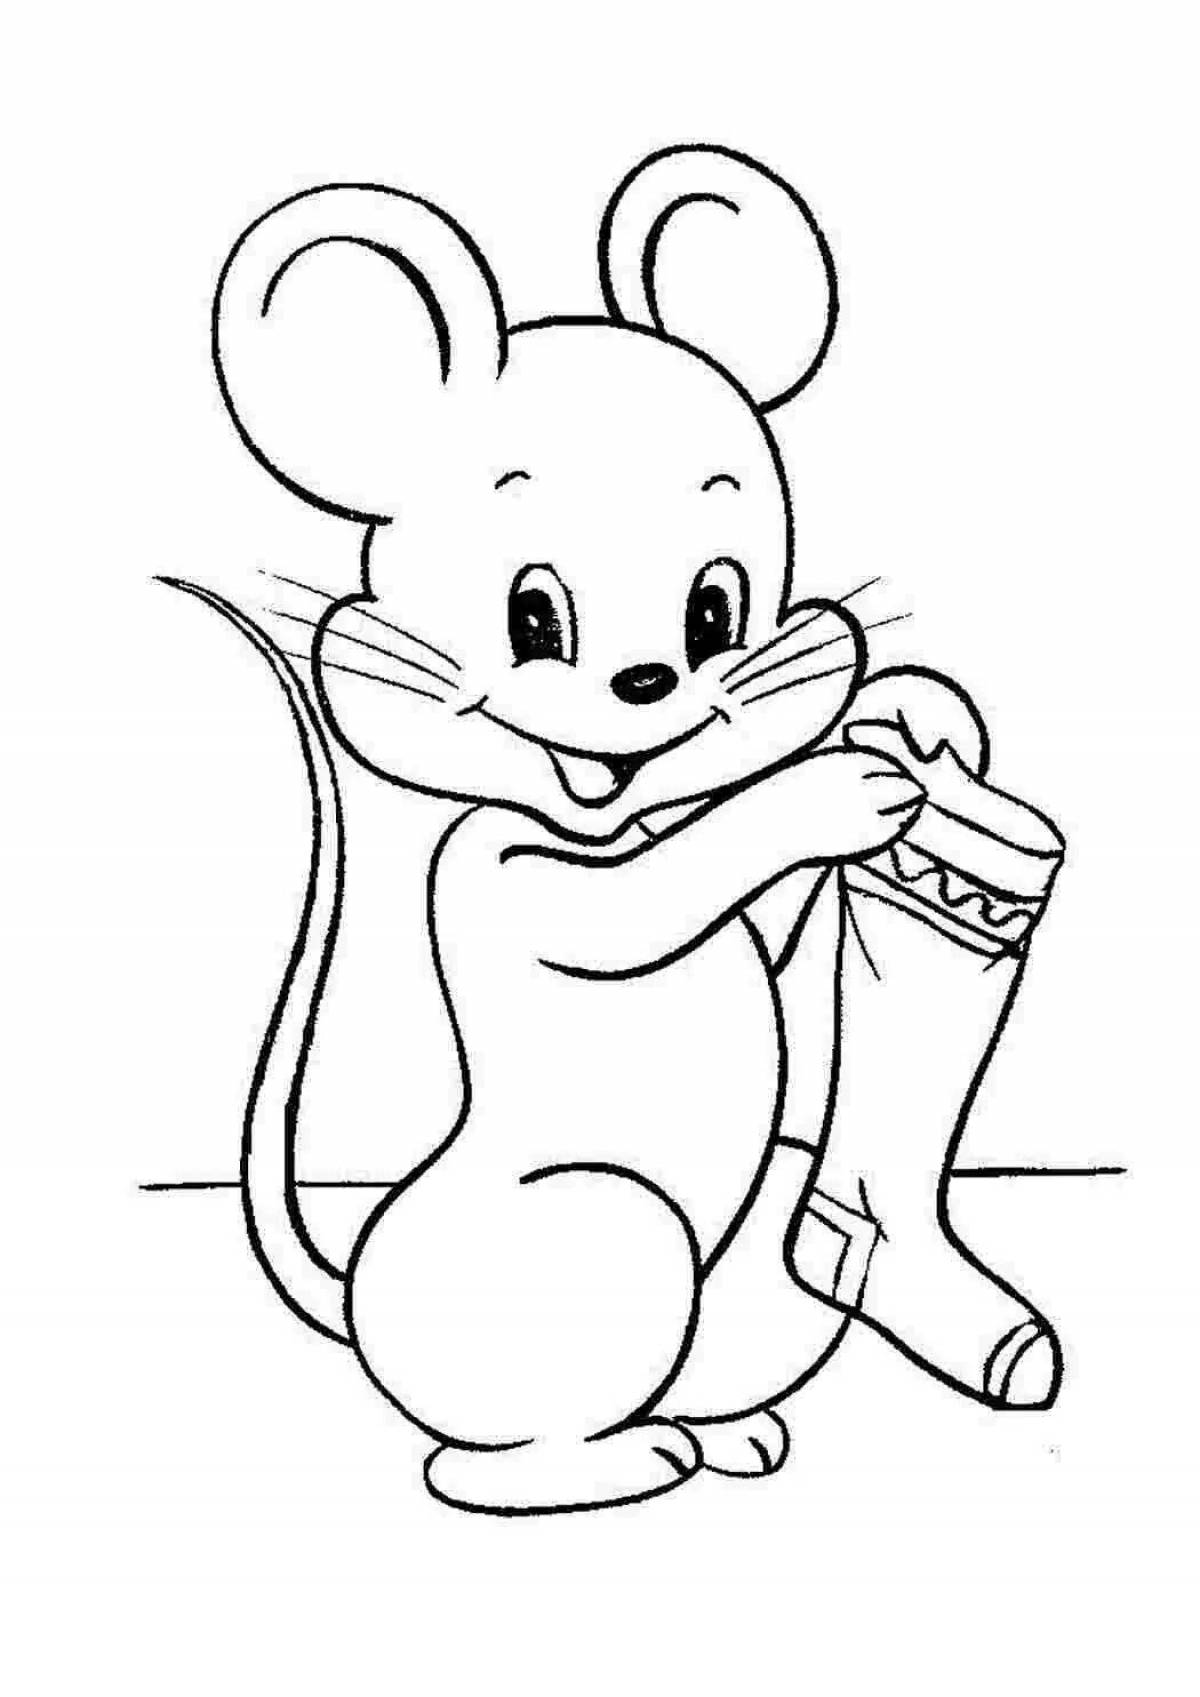 Amazing mouse coloring page for 4-5 year olds